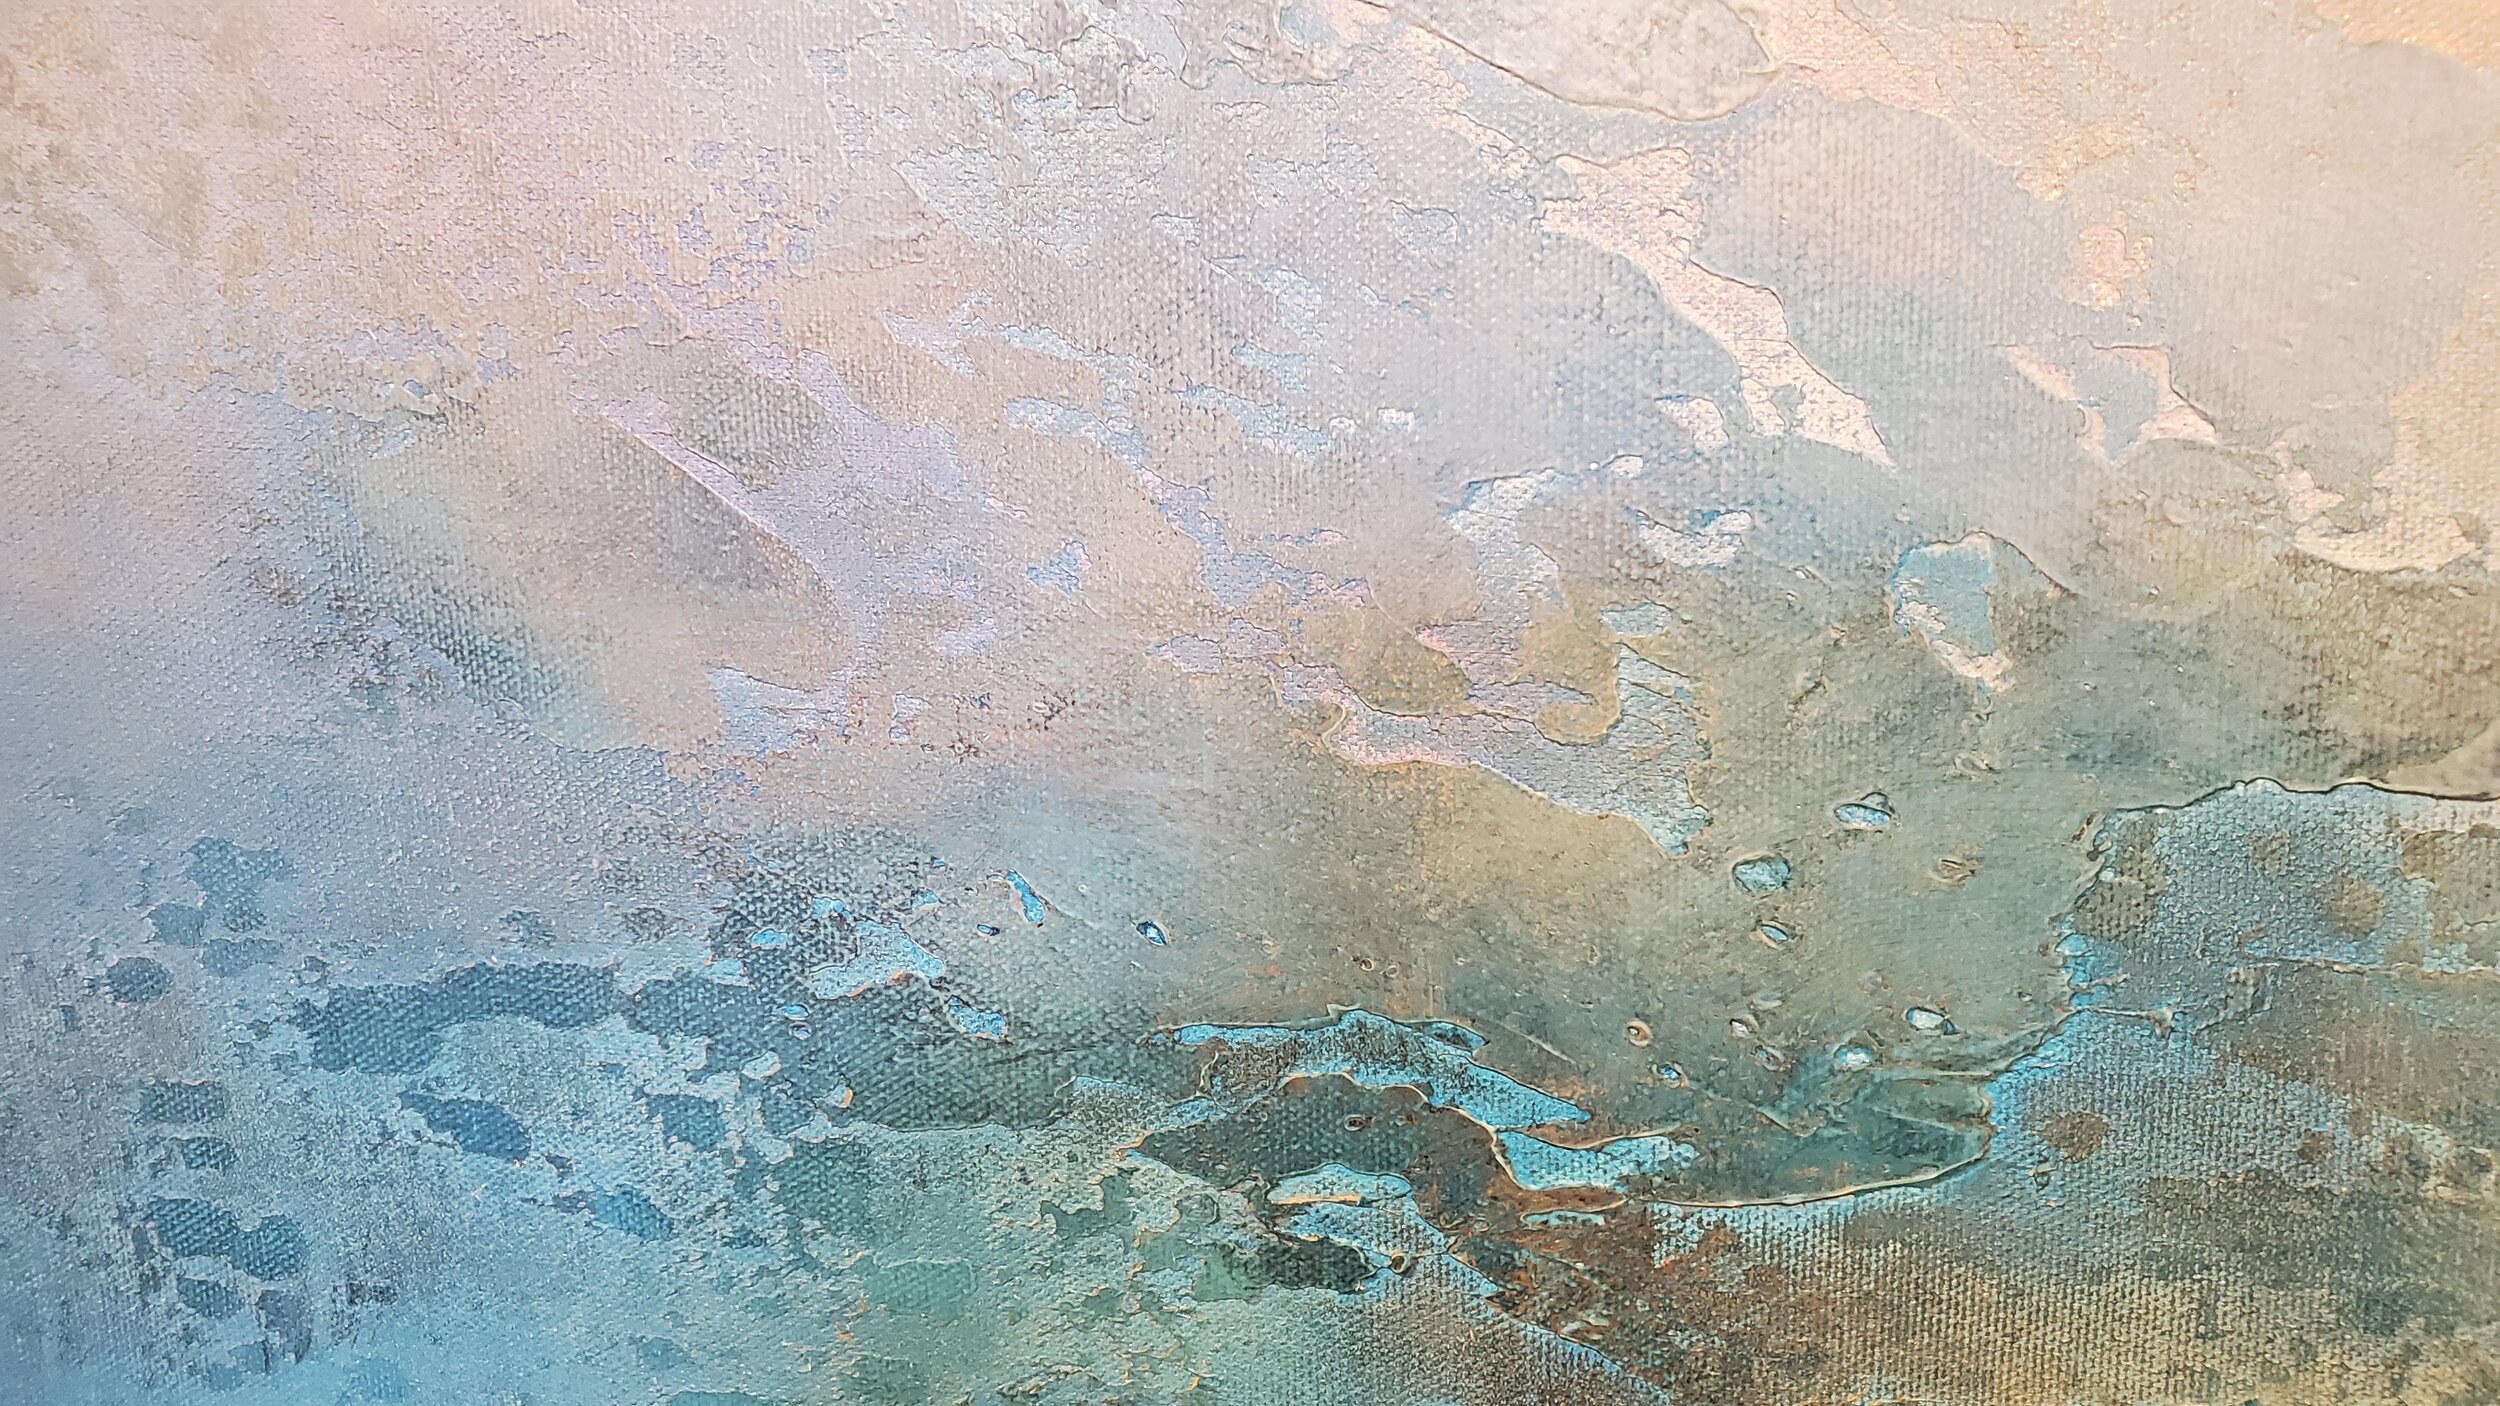  Painting #11 Found- Vancouver abstract painter, Donna Giraud has eleven new available artworks for sale in her 2020 solo art exhibition titled, Lost and Found. Her large scale, abstract, textural artworks are perfect for any interior design aestheti